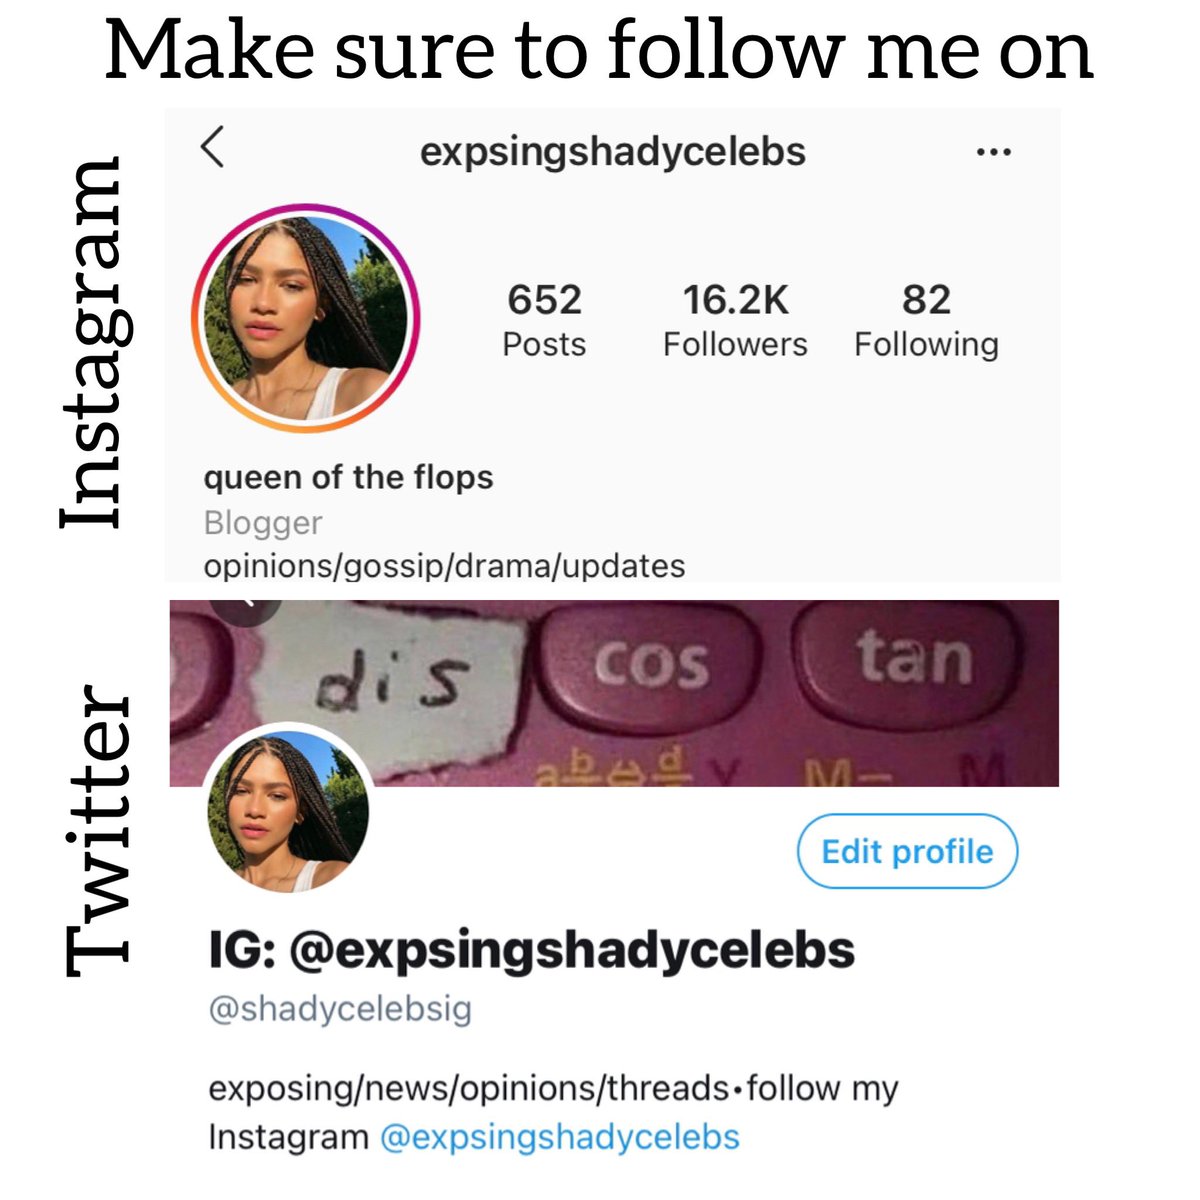 That’s it for this thread! Make sure to follow me on Twitter and Instagram for more tea!